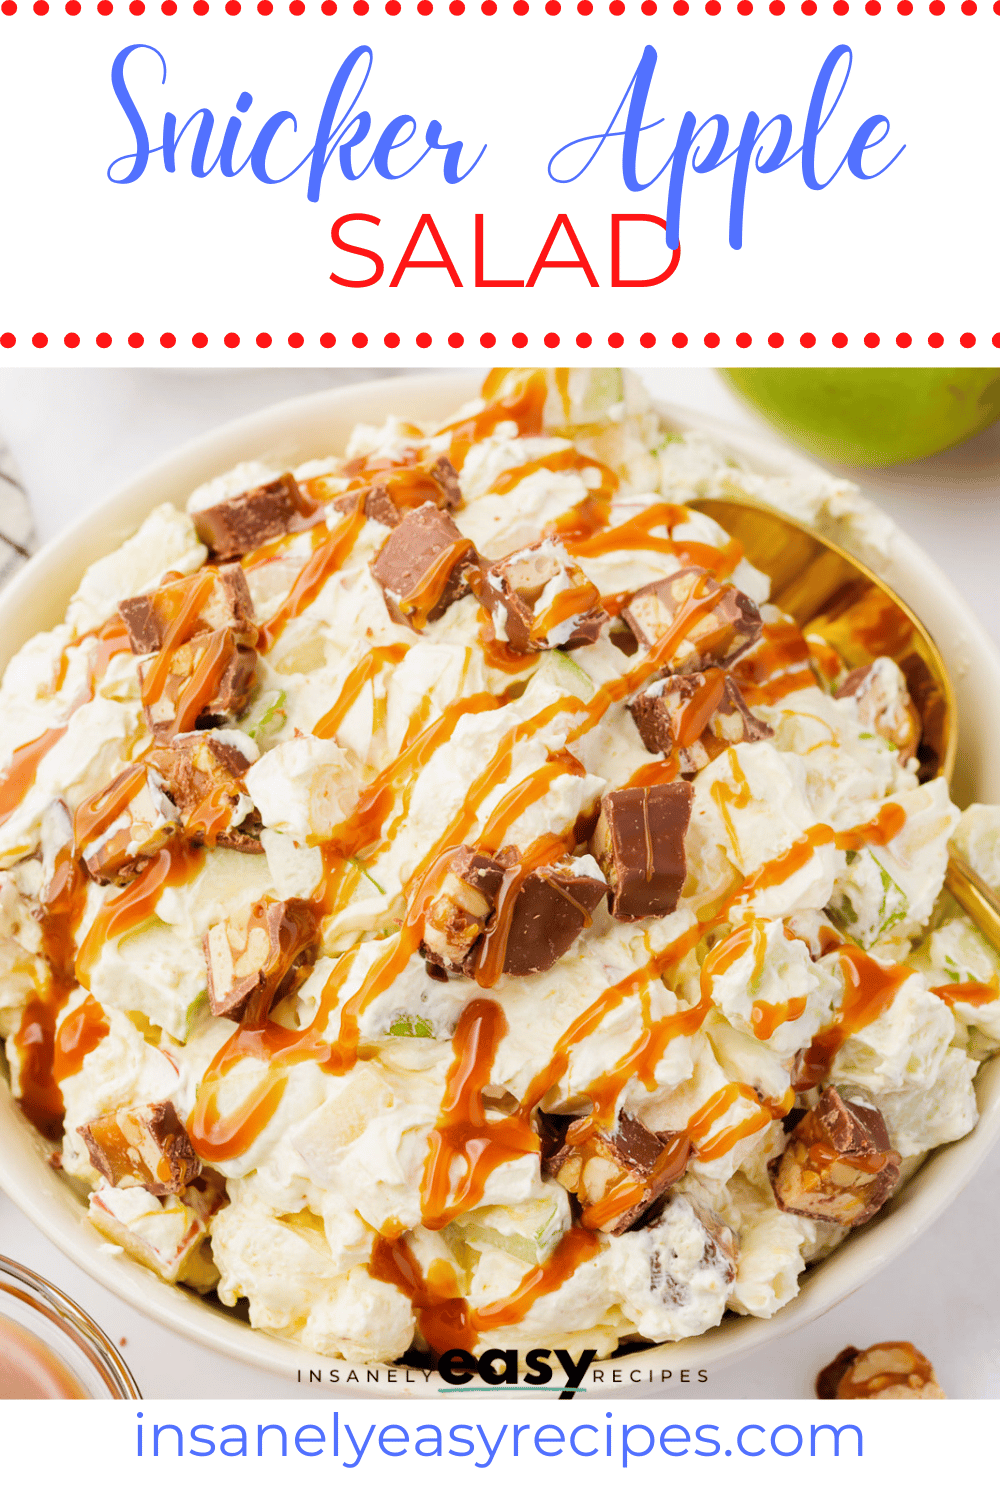 Snicker Apple Salad in a white bowl. Looks like fluffy white stuff, with apple chunks, snickers chunks, marshmallows and caramel sauce, with text overlay: snicker apple salad